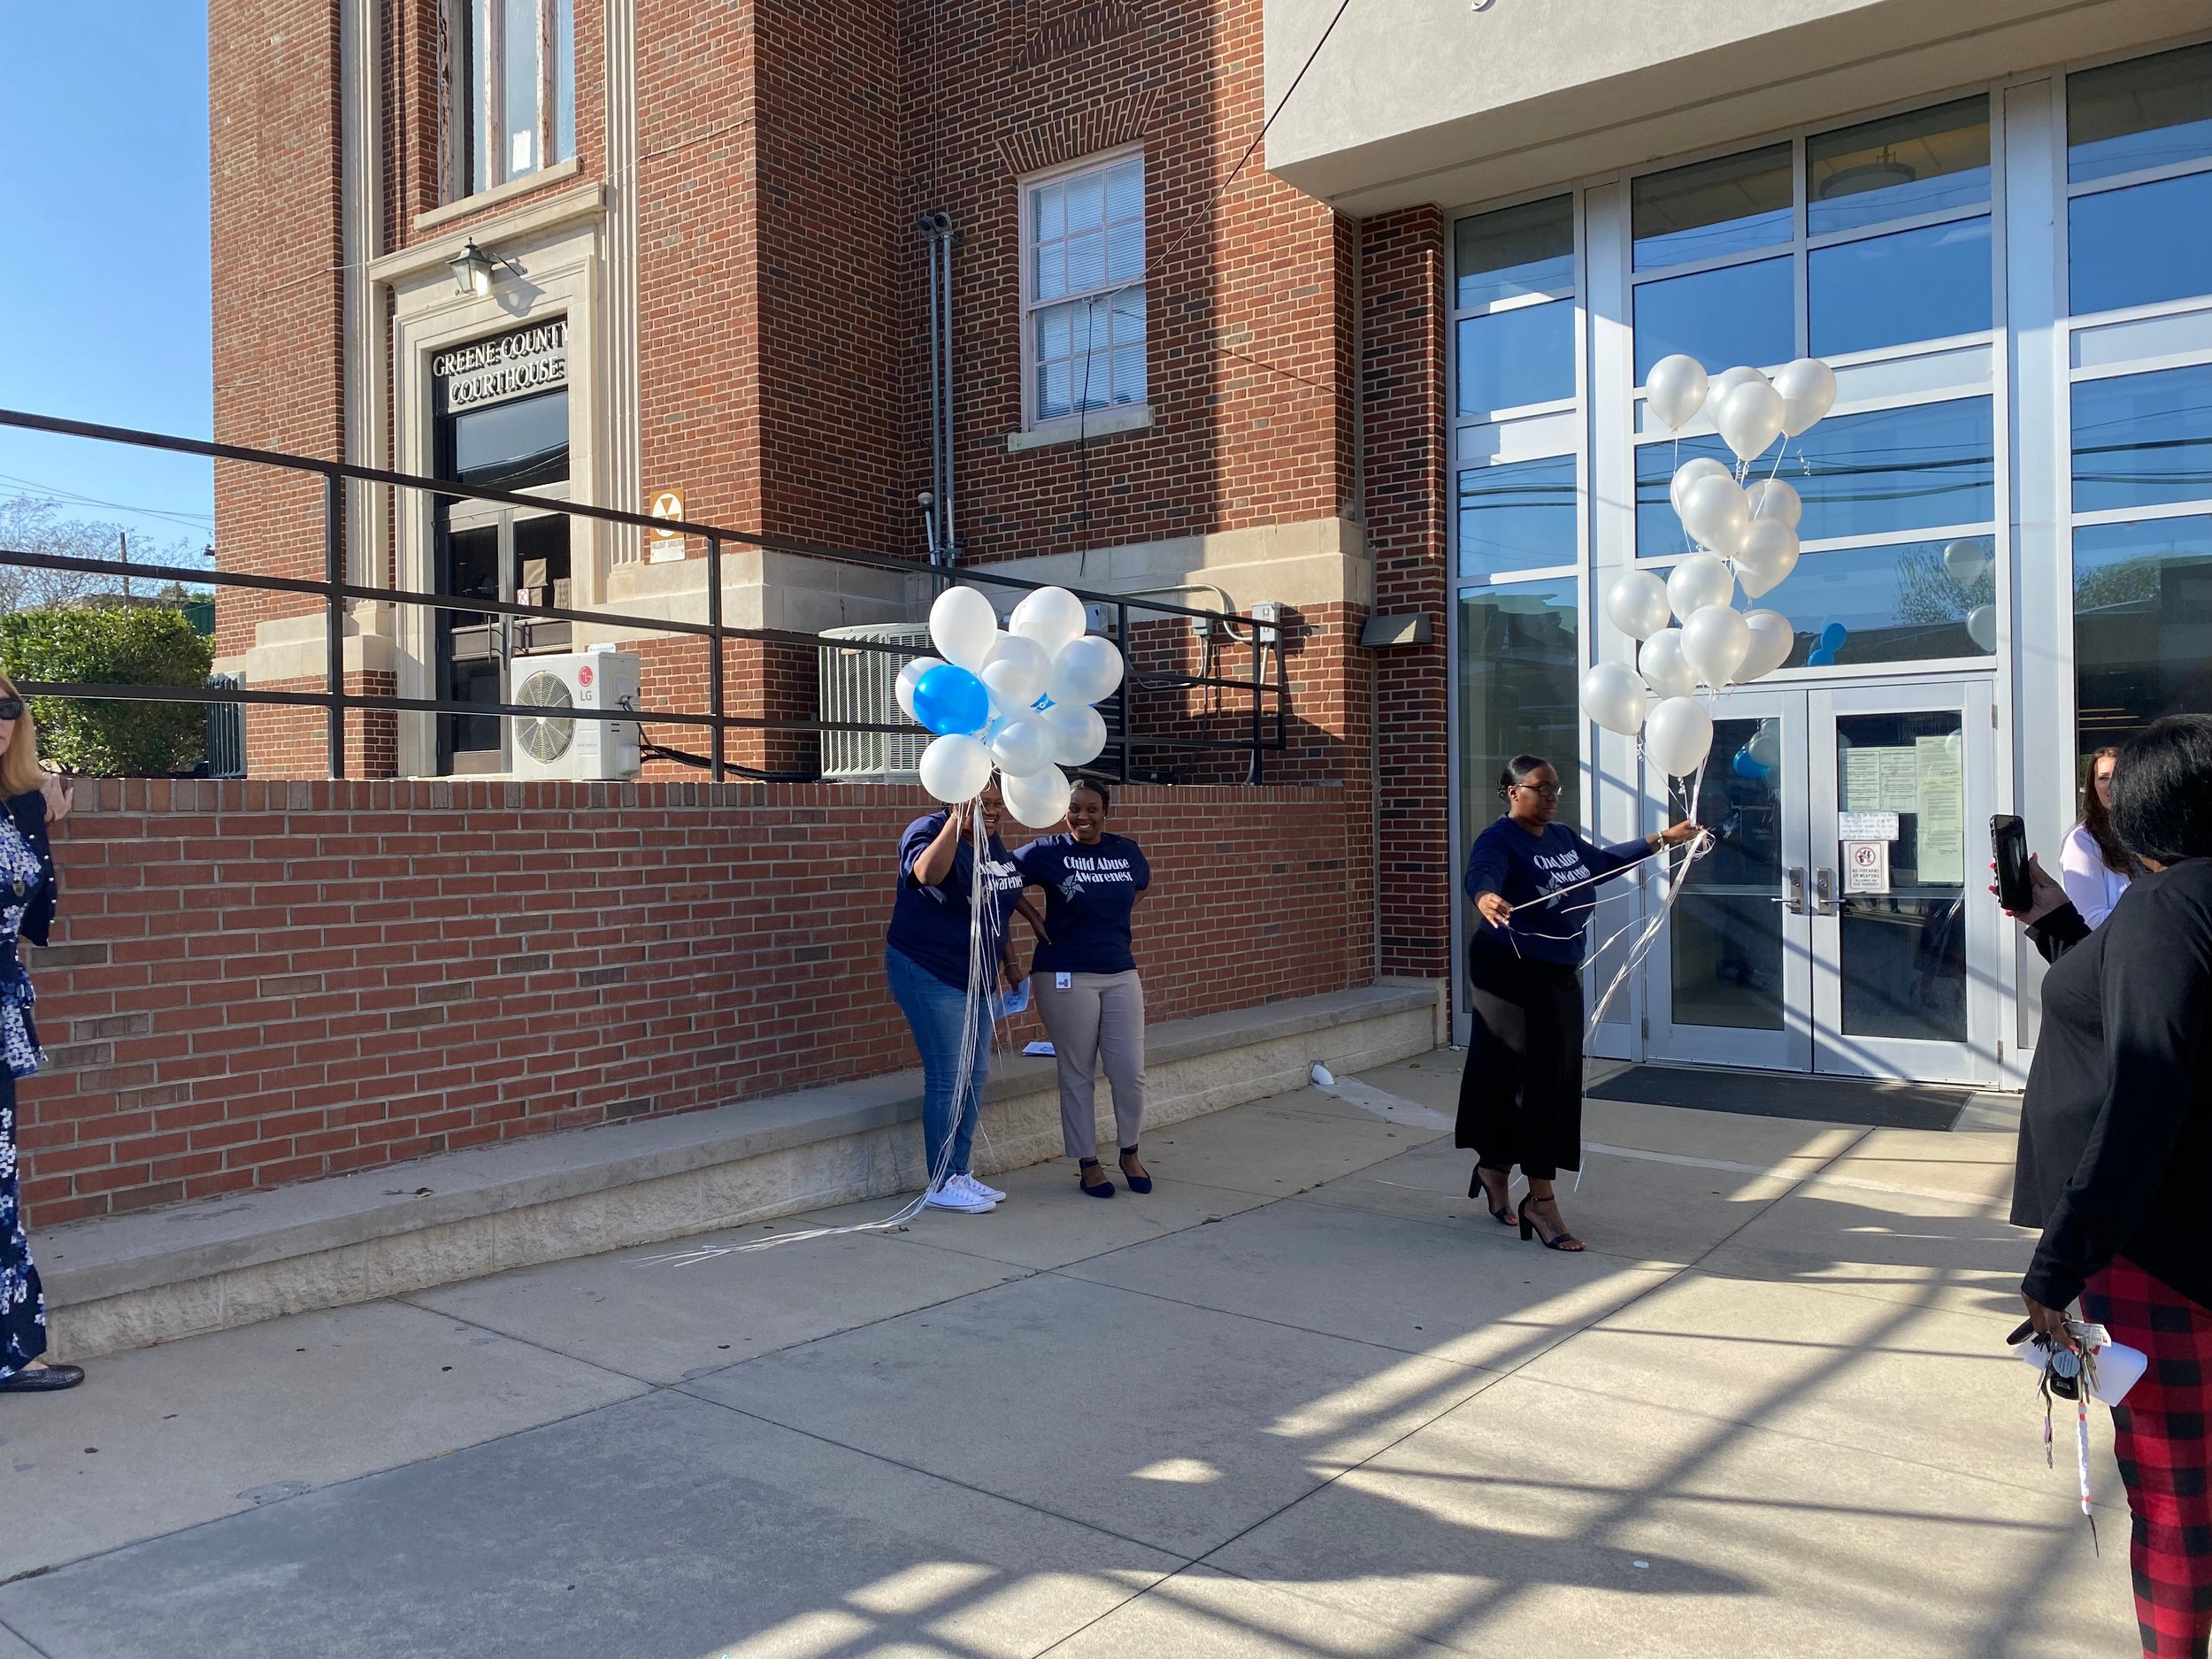 Greene County DSS releases balloons in honor of National Child Abuse Prevention Month. Photo: Raeanne Dixon/Neuse News